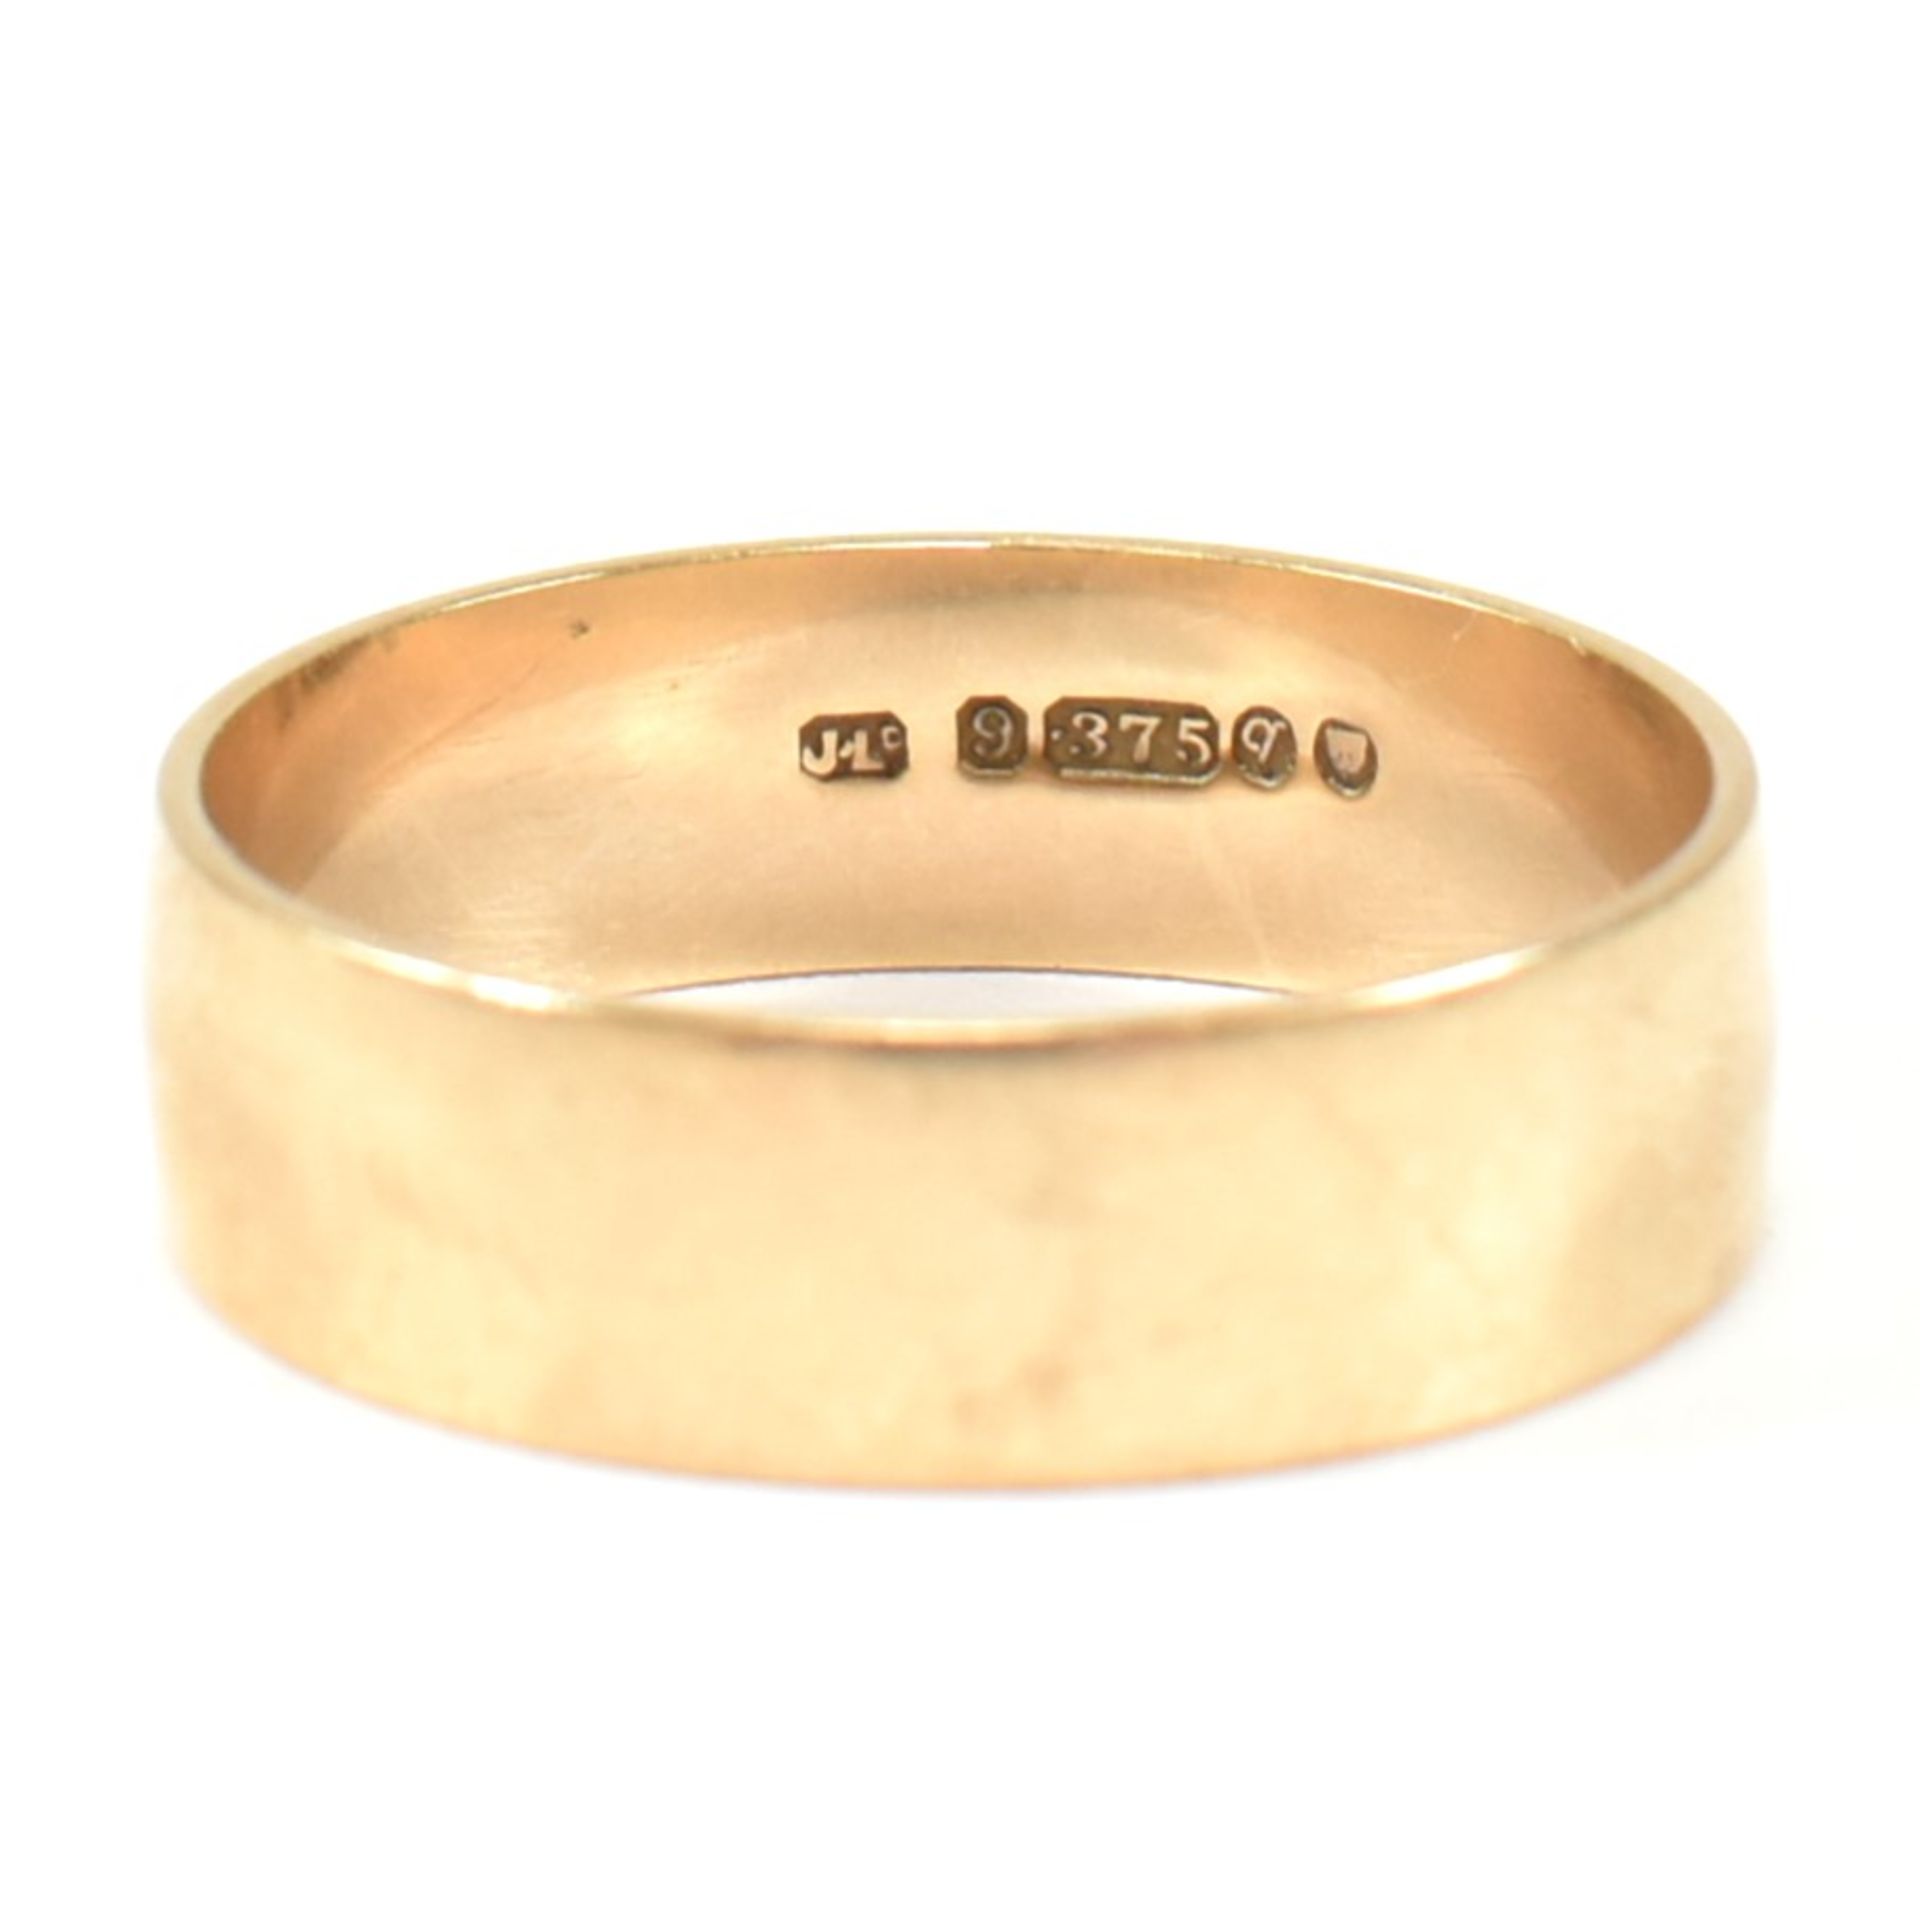 HALLMARKED 9CT GOLD BAND RING - Image 4 of 5